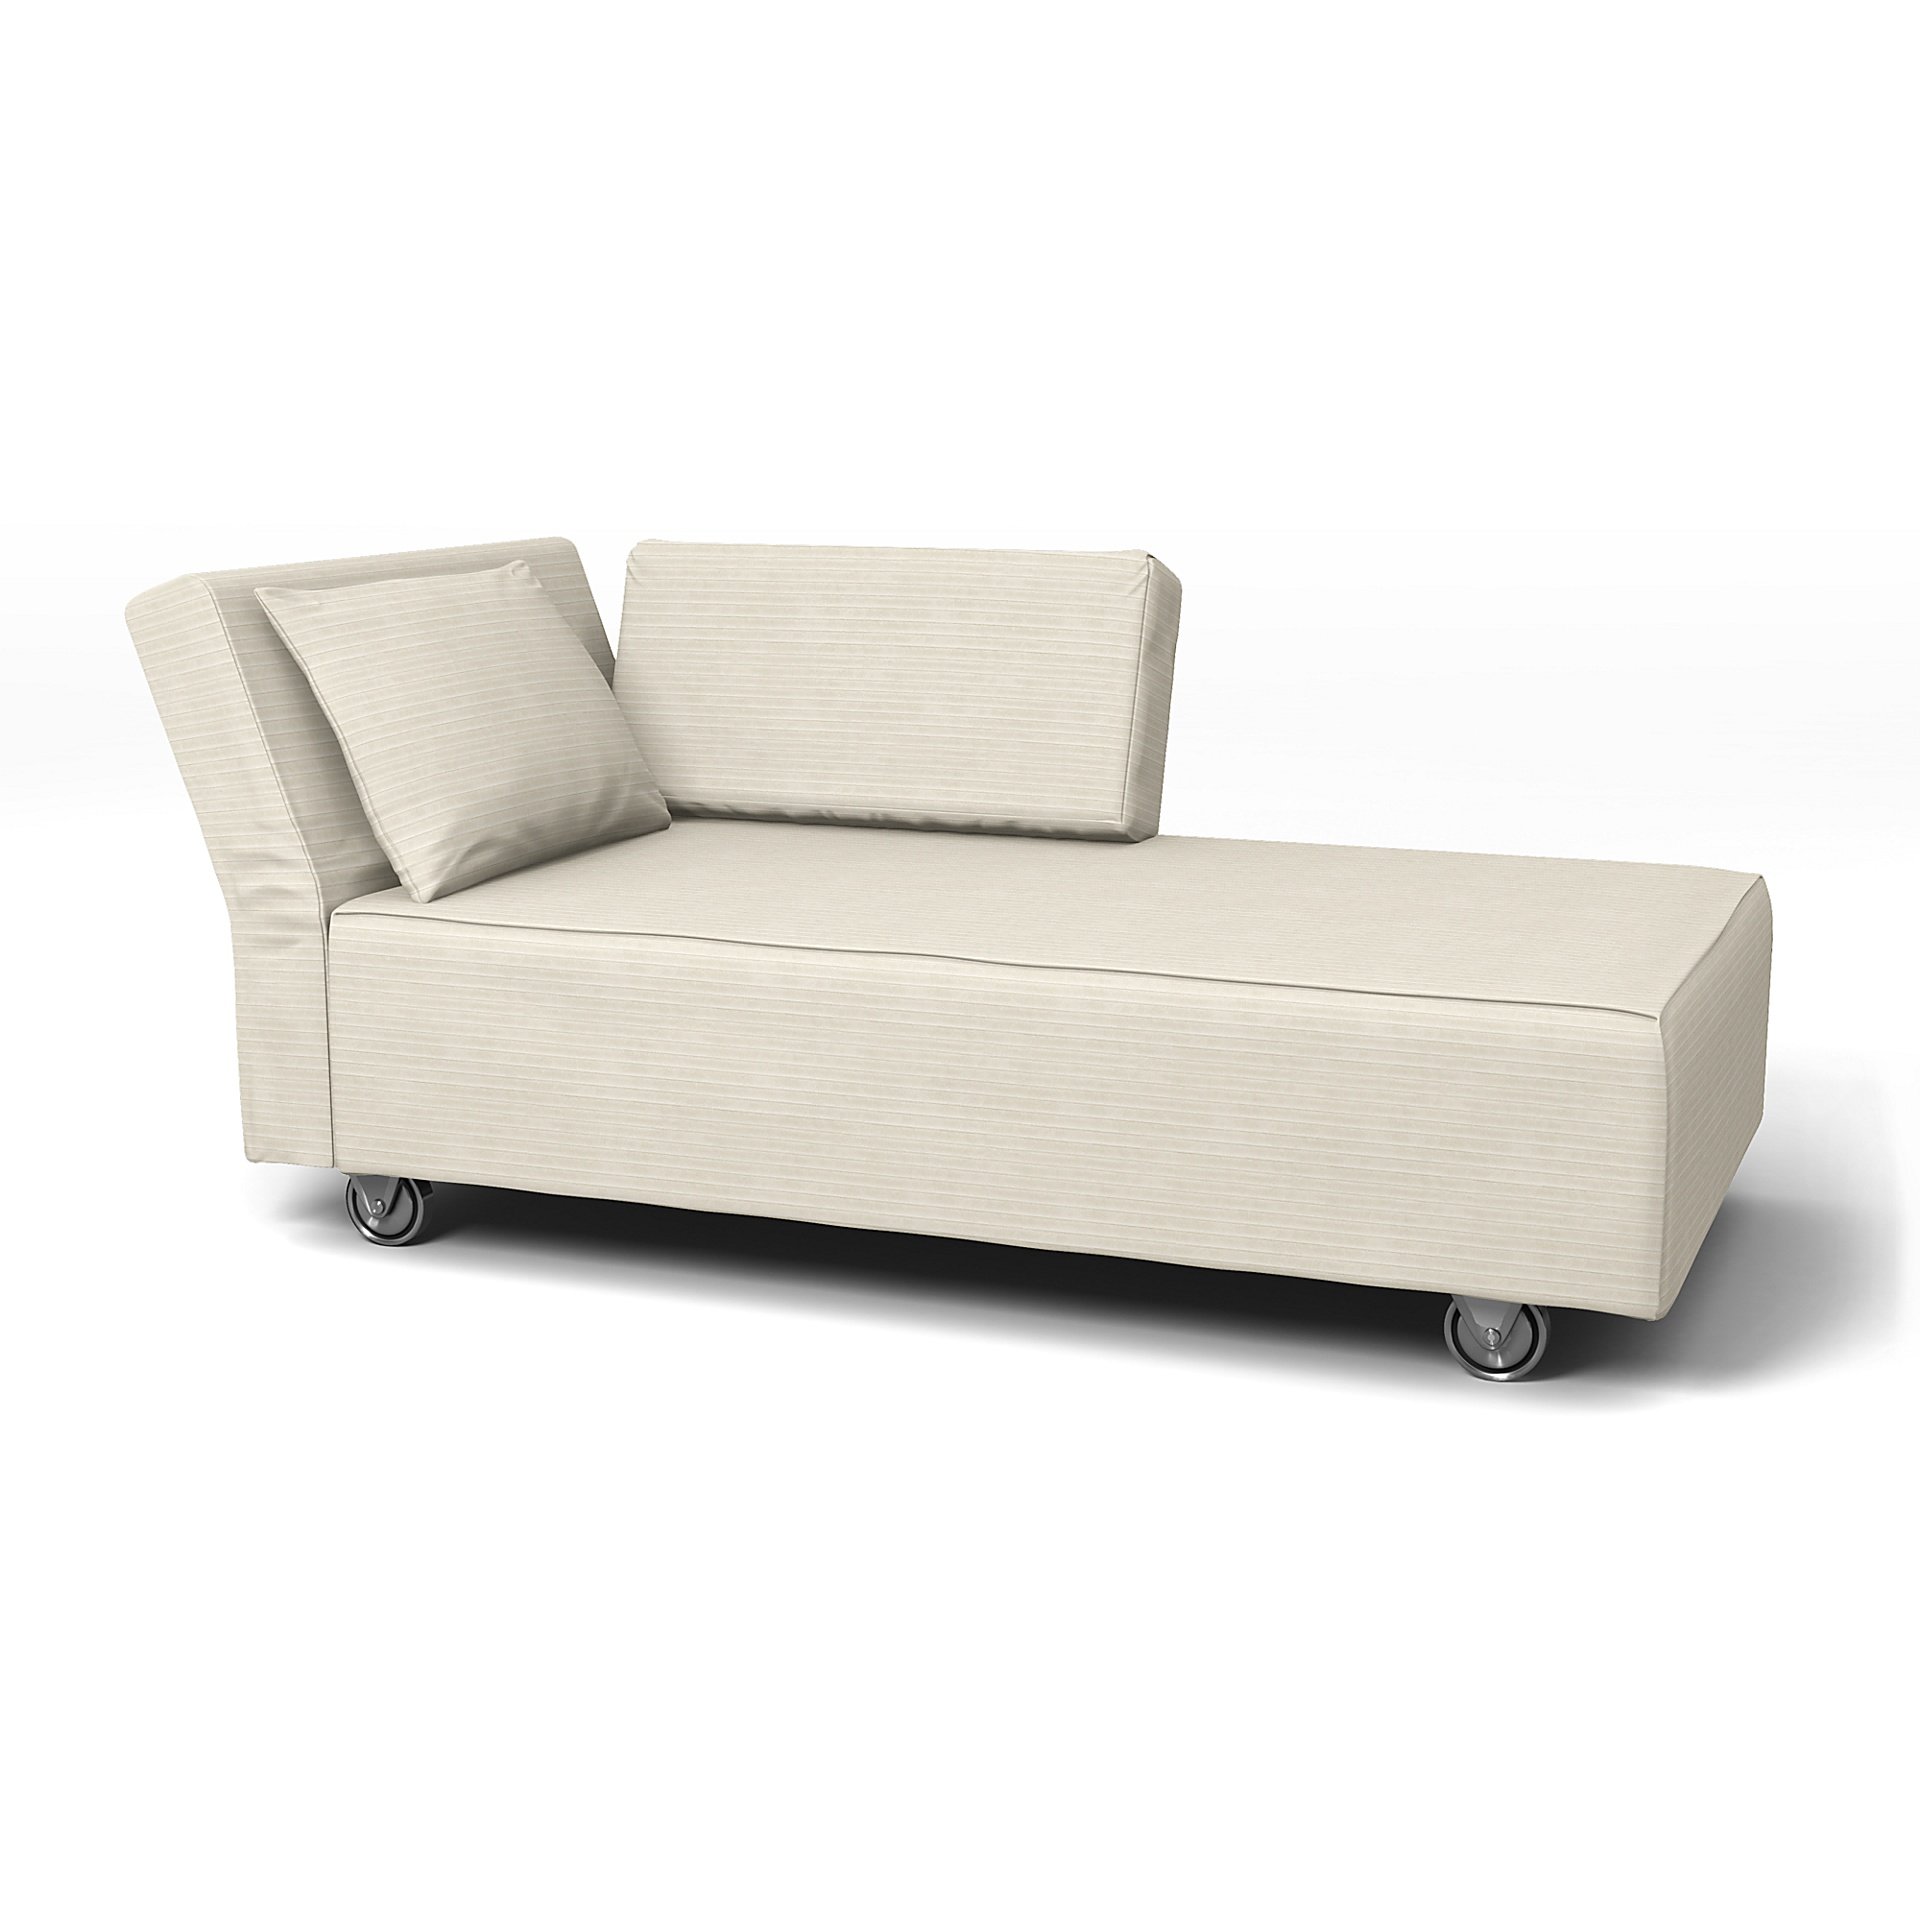 IKEA - Falsterbo Chaise with Left Armrest Cover, Tofu, Corduroy - Bemz